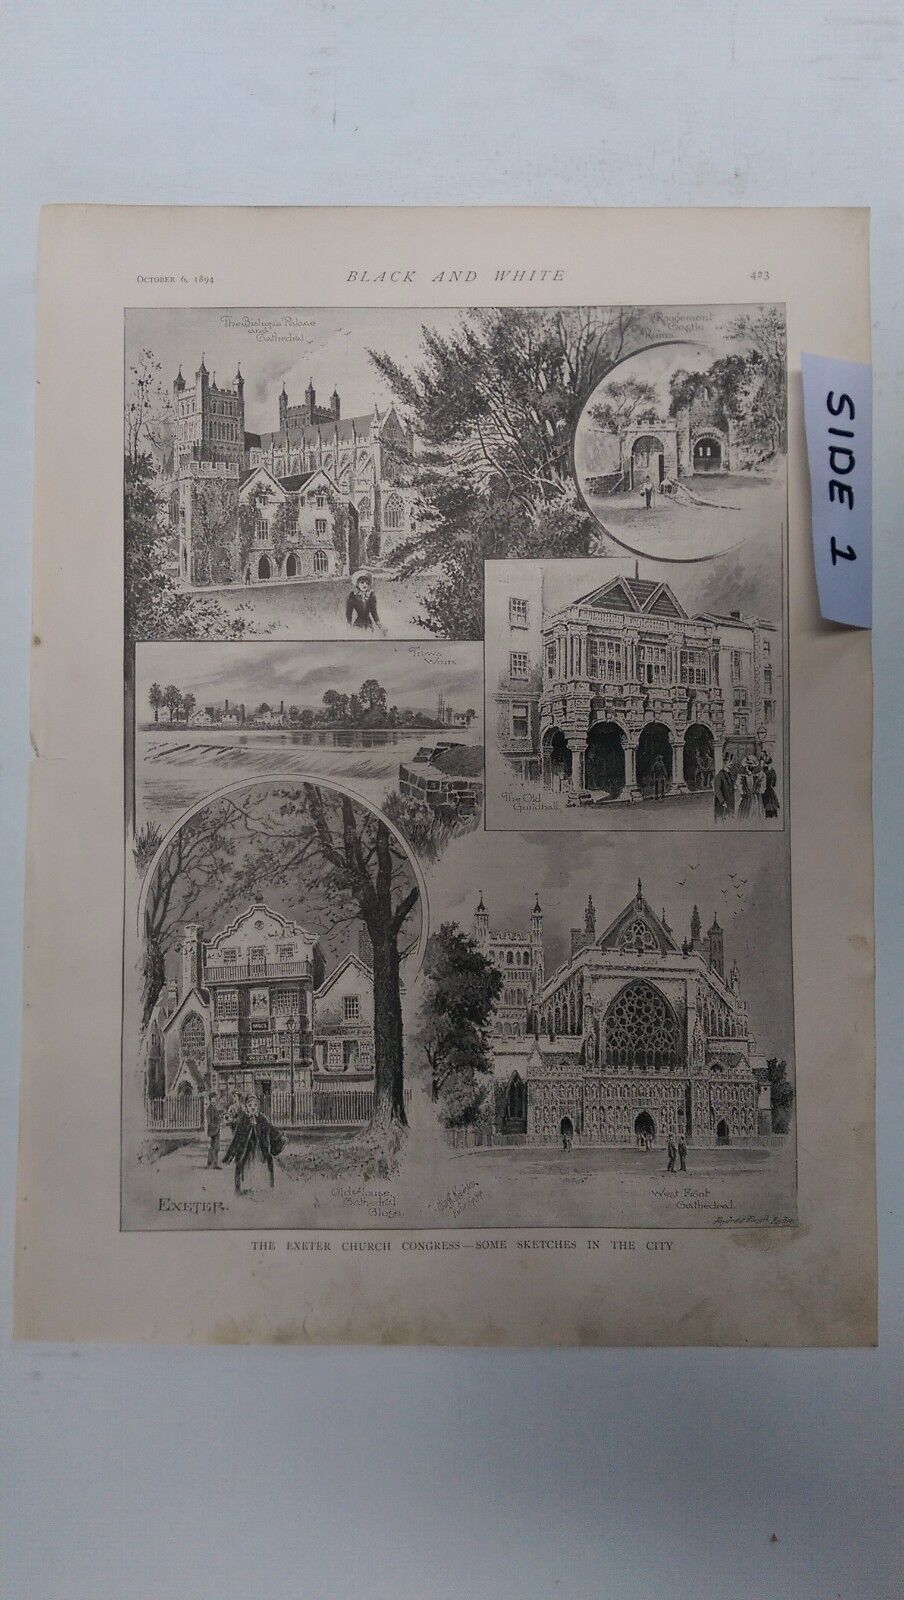 The Exeter Church Congress: Some Sketches: 1894 Black & White Magazine Pages